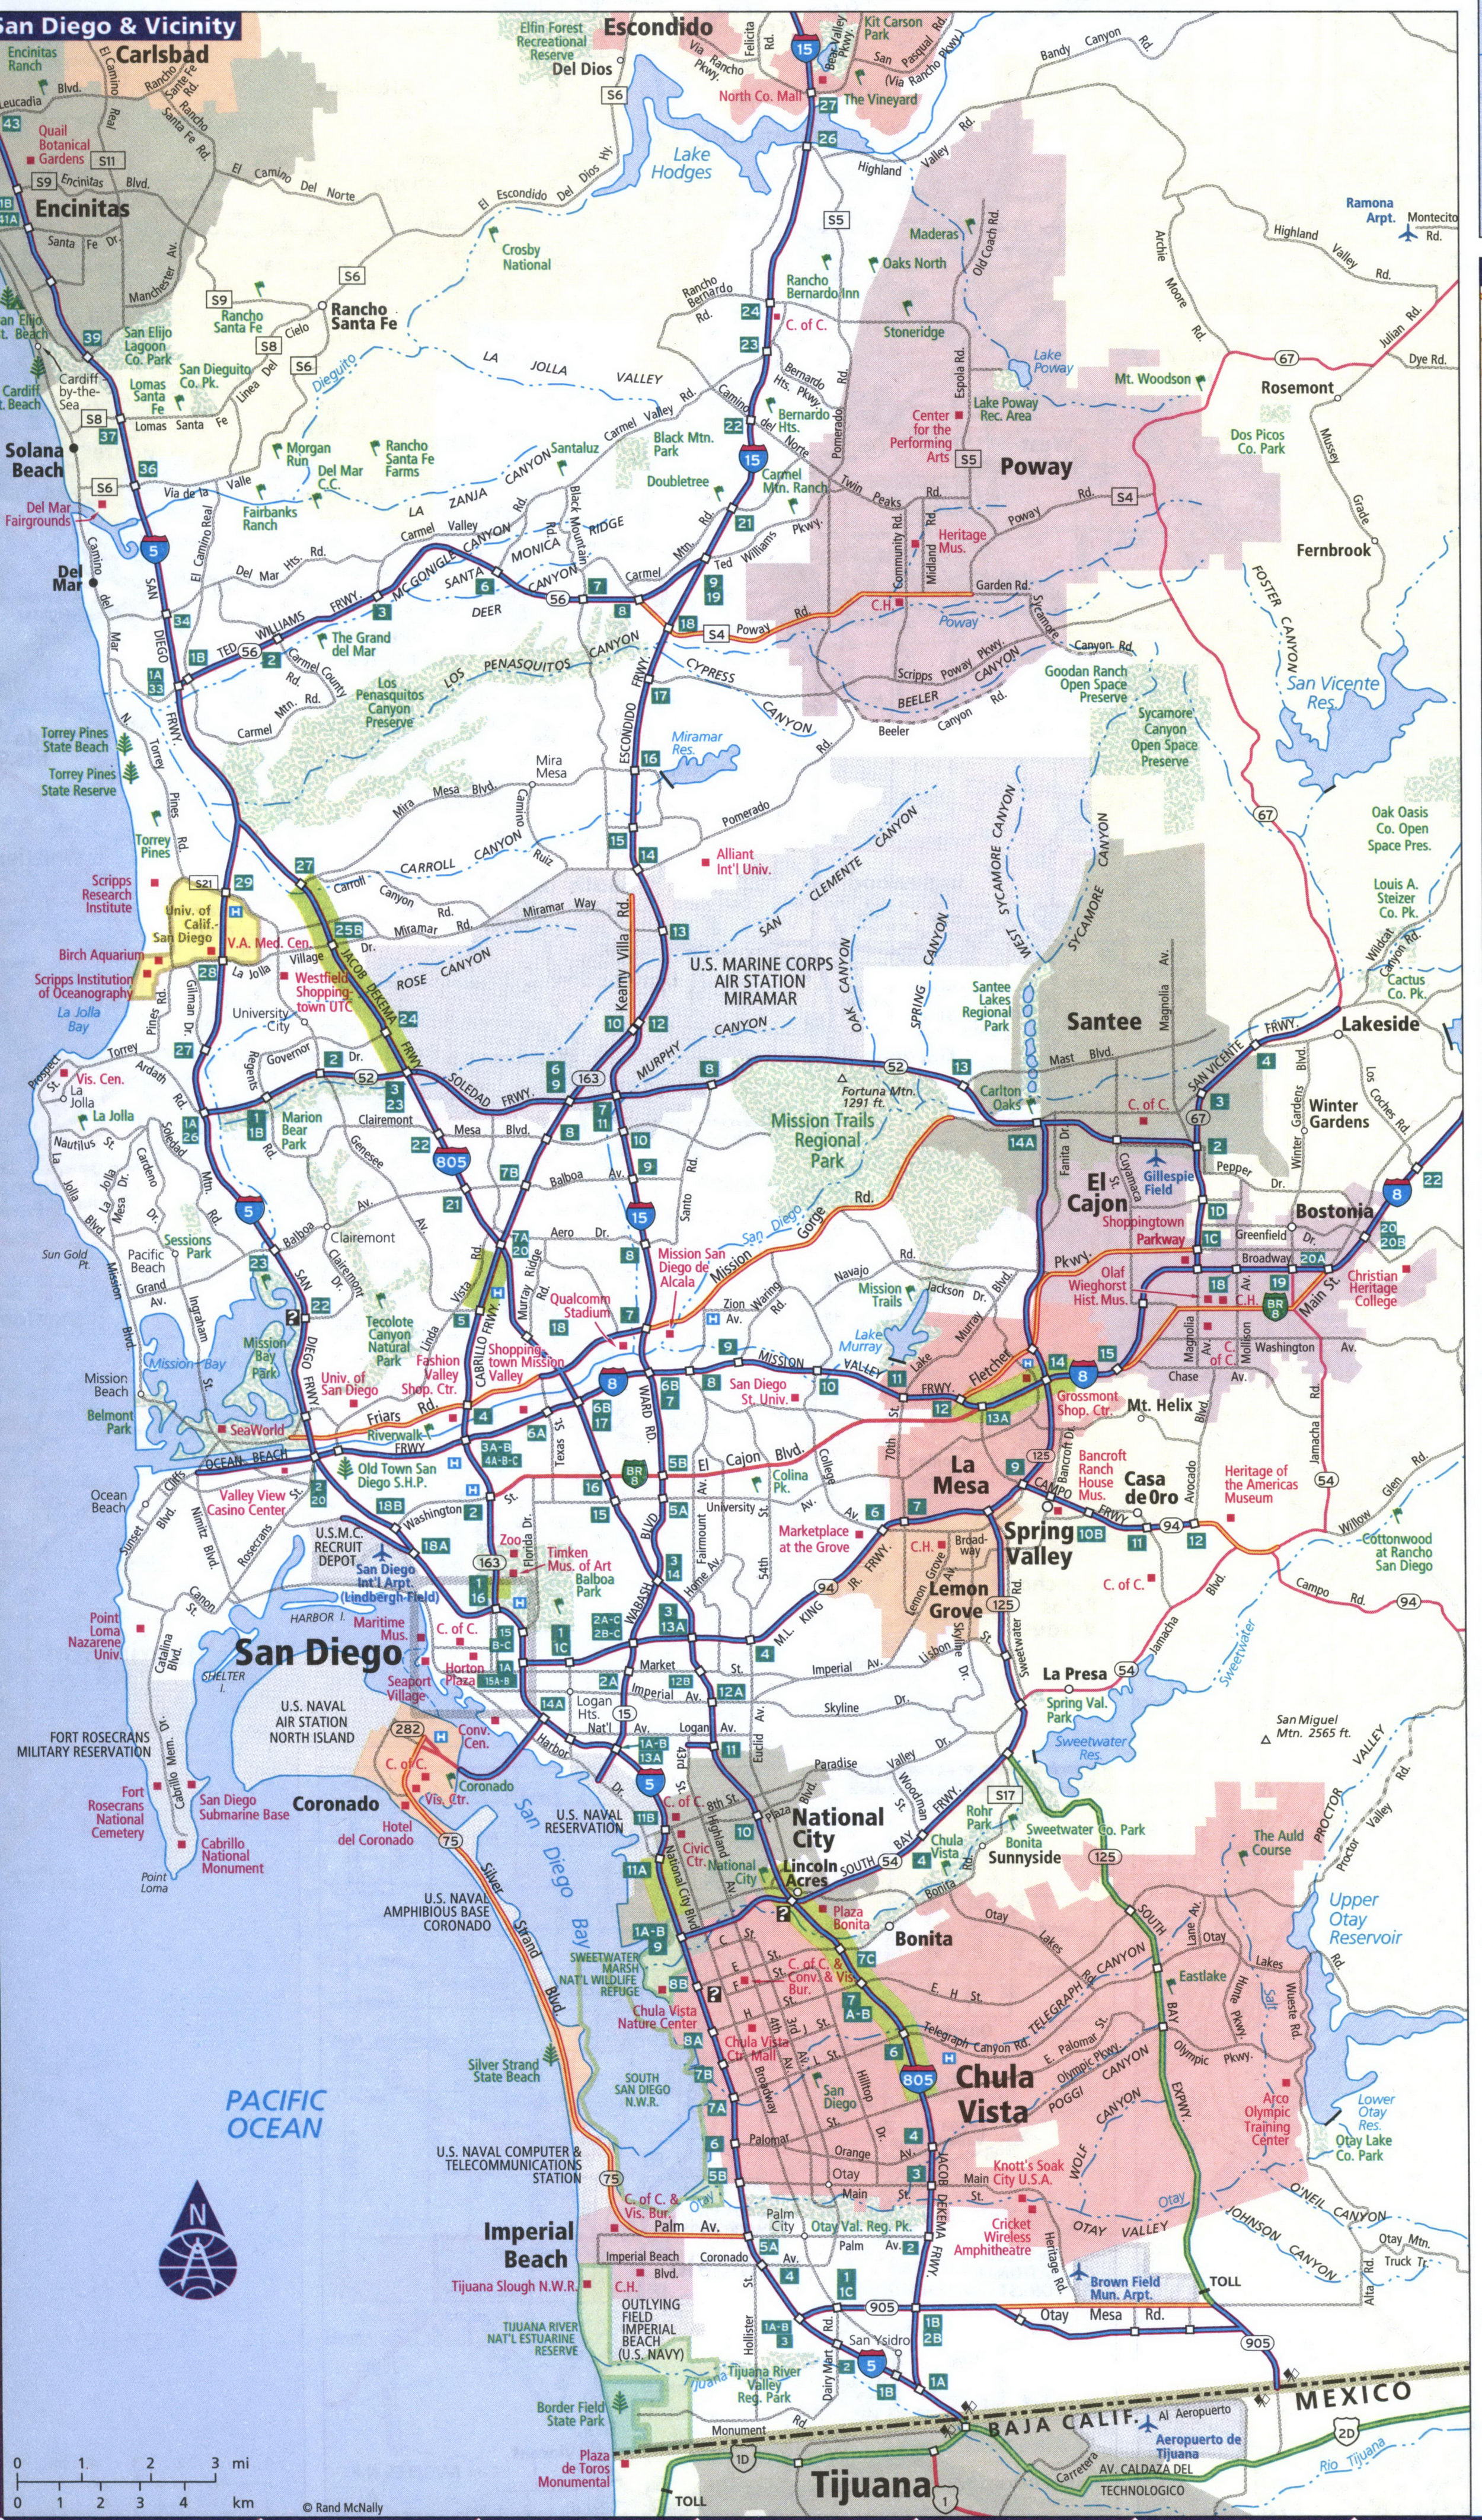 Map of San Diego and vicinity